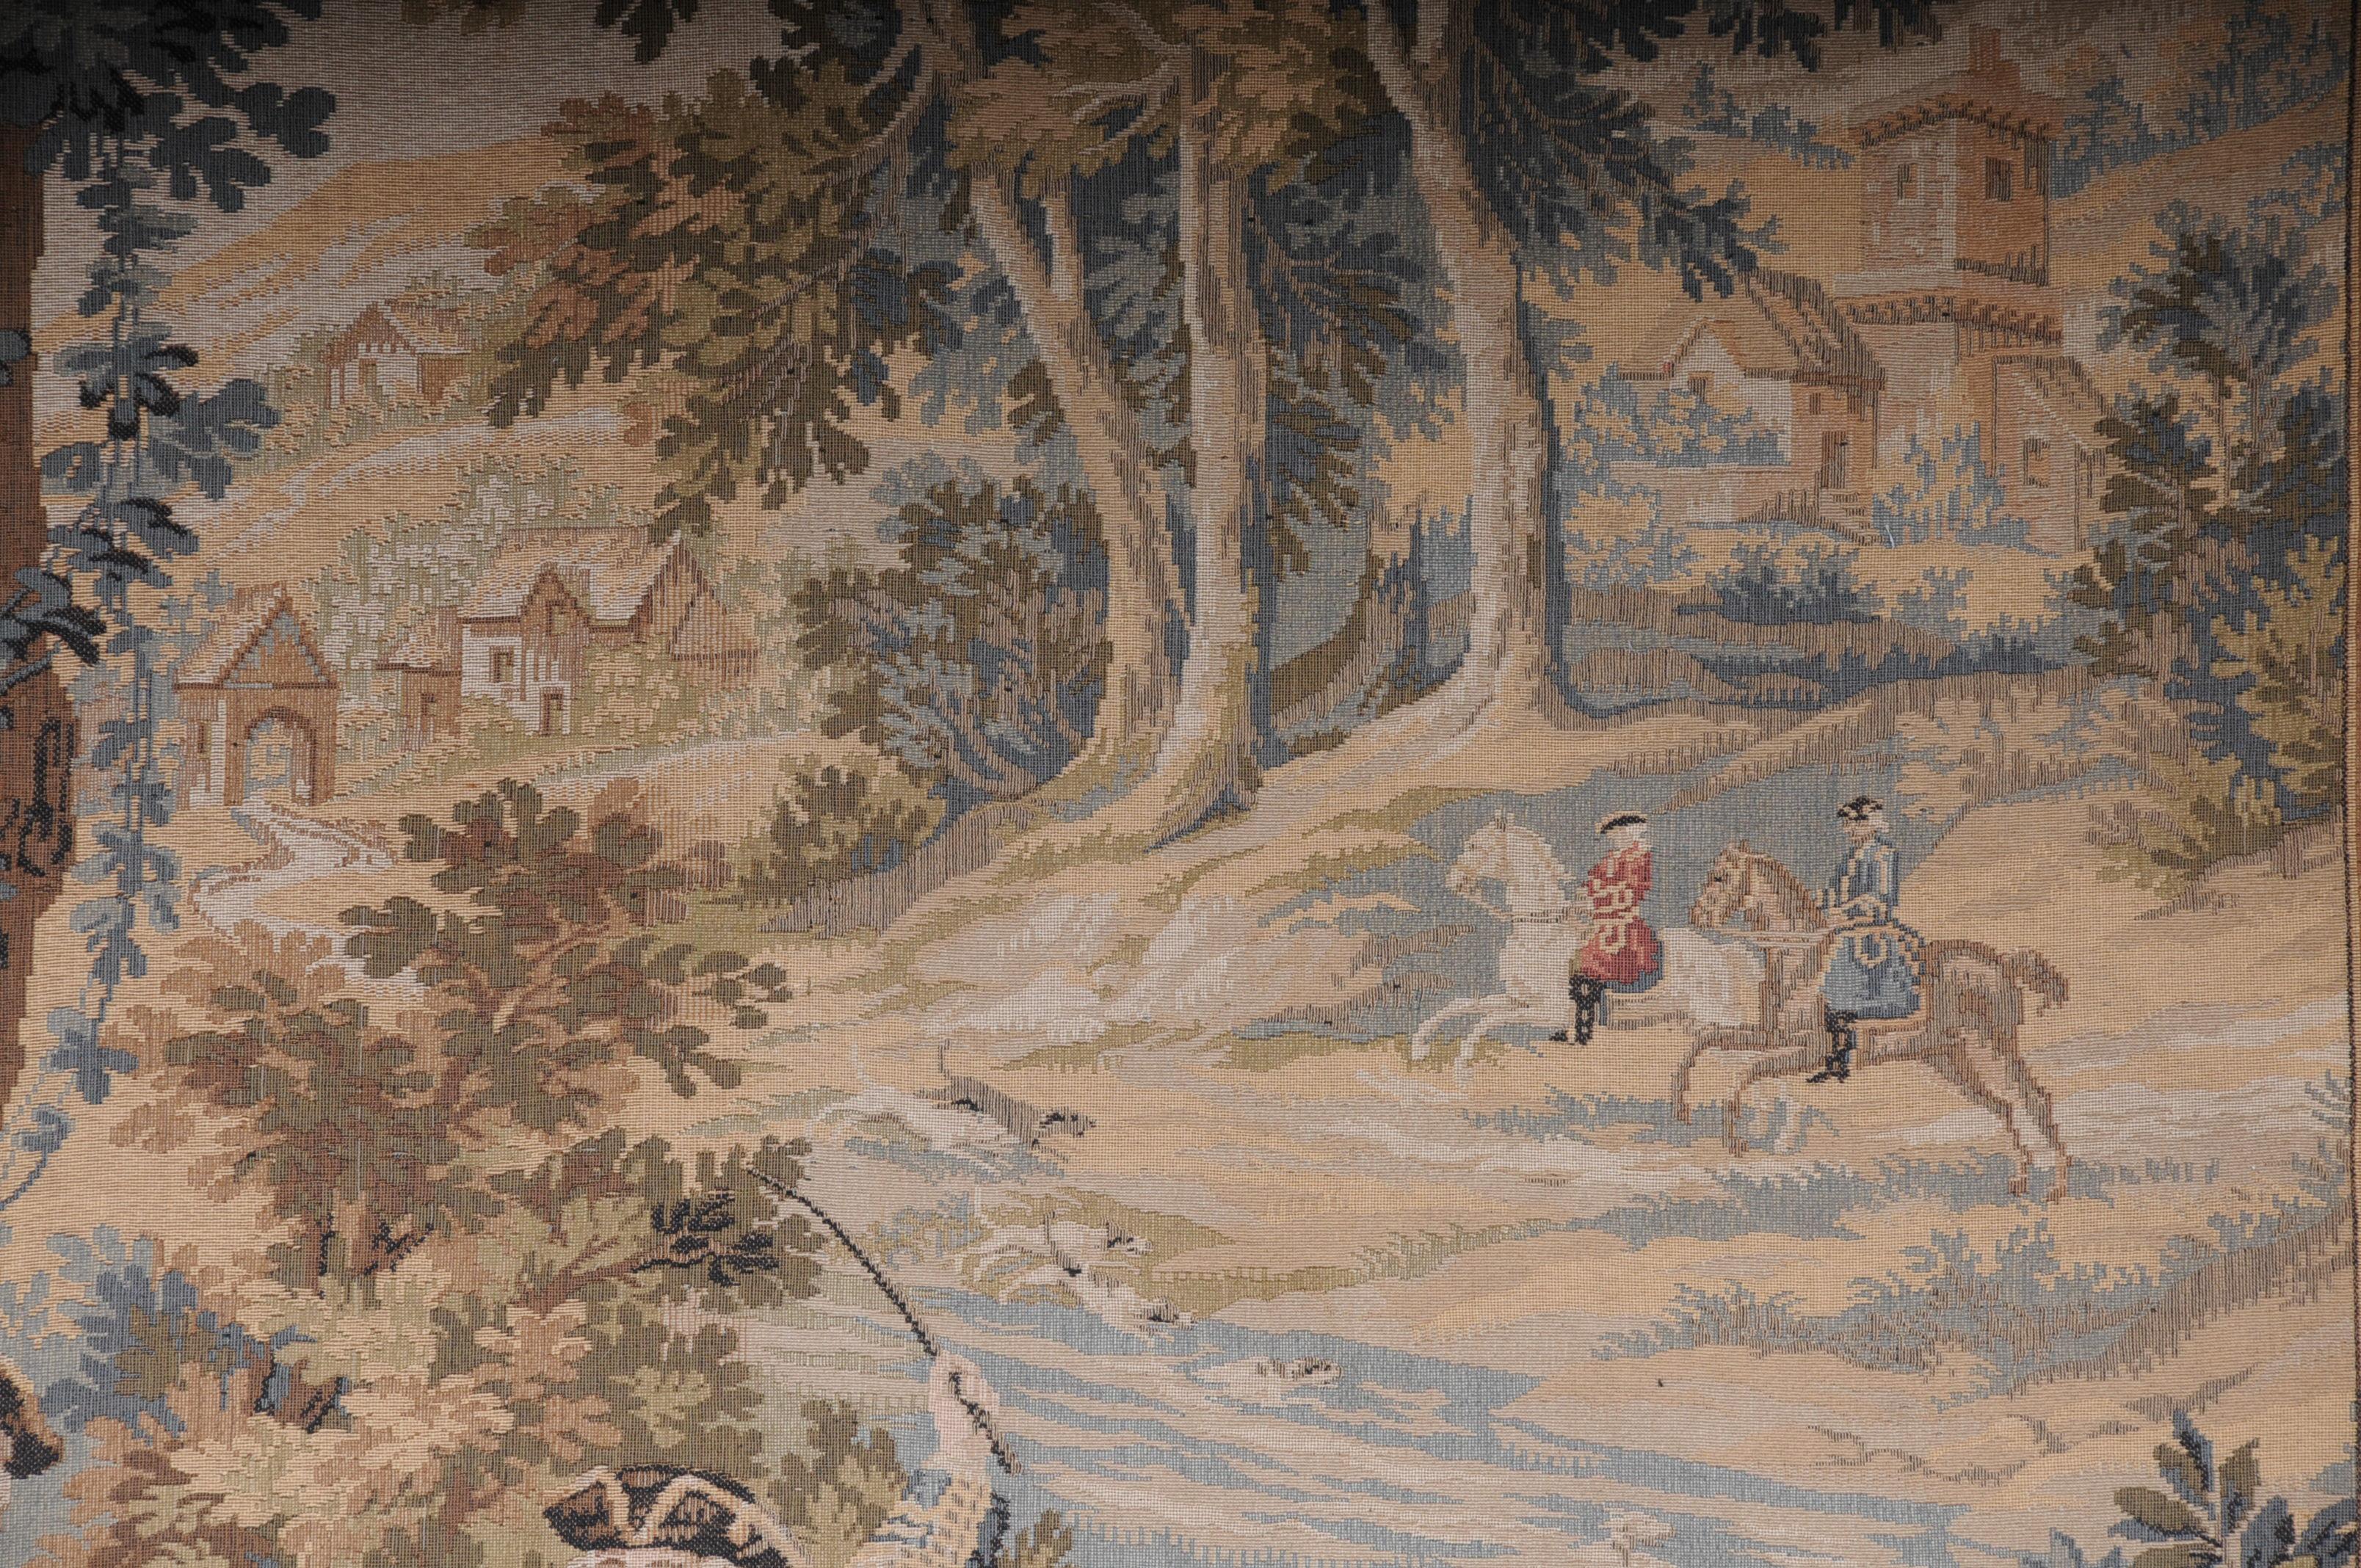 20th Century French wall gobelin tapestry, hunting scene

gobelin tapestry, hunting scene, France 20th Century with curtain rod.